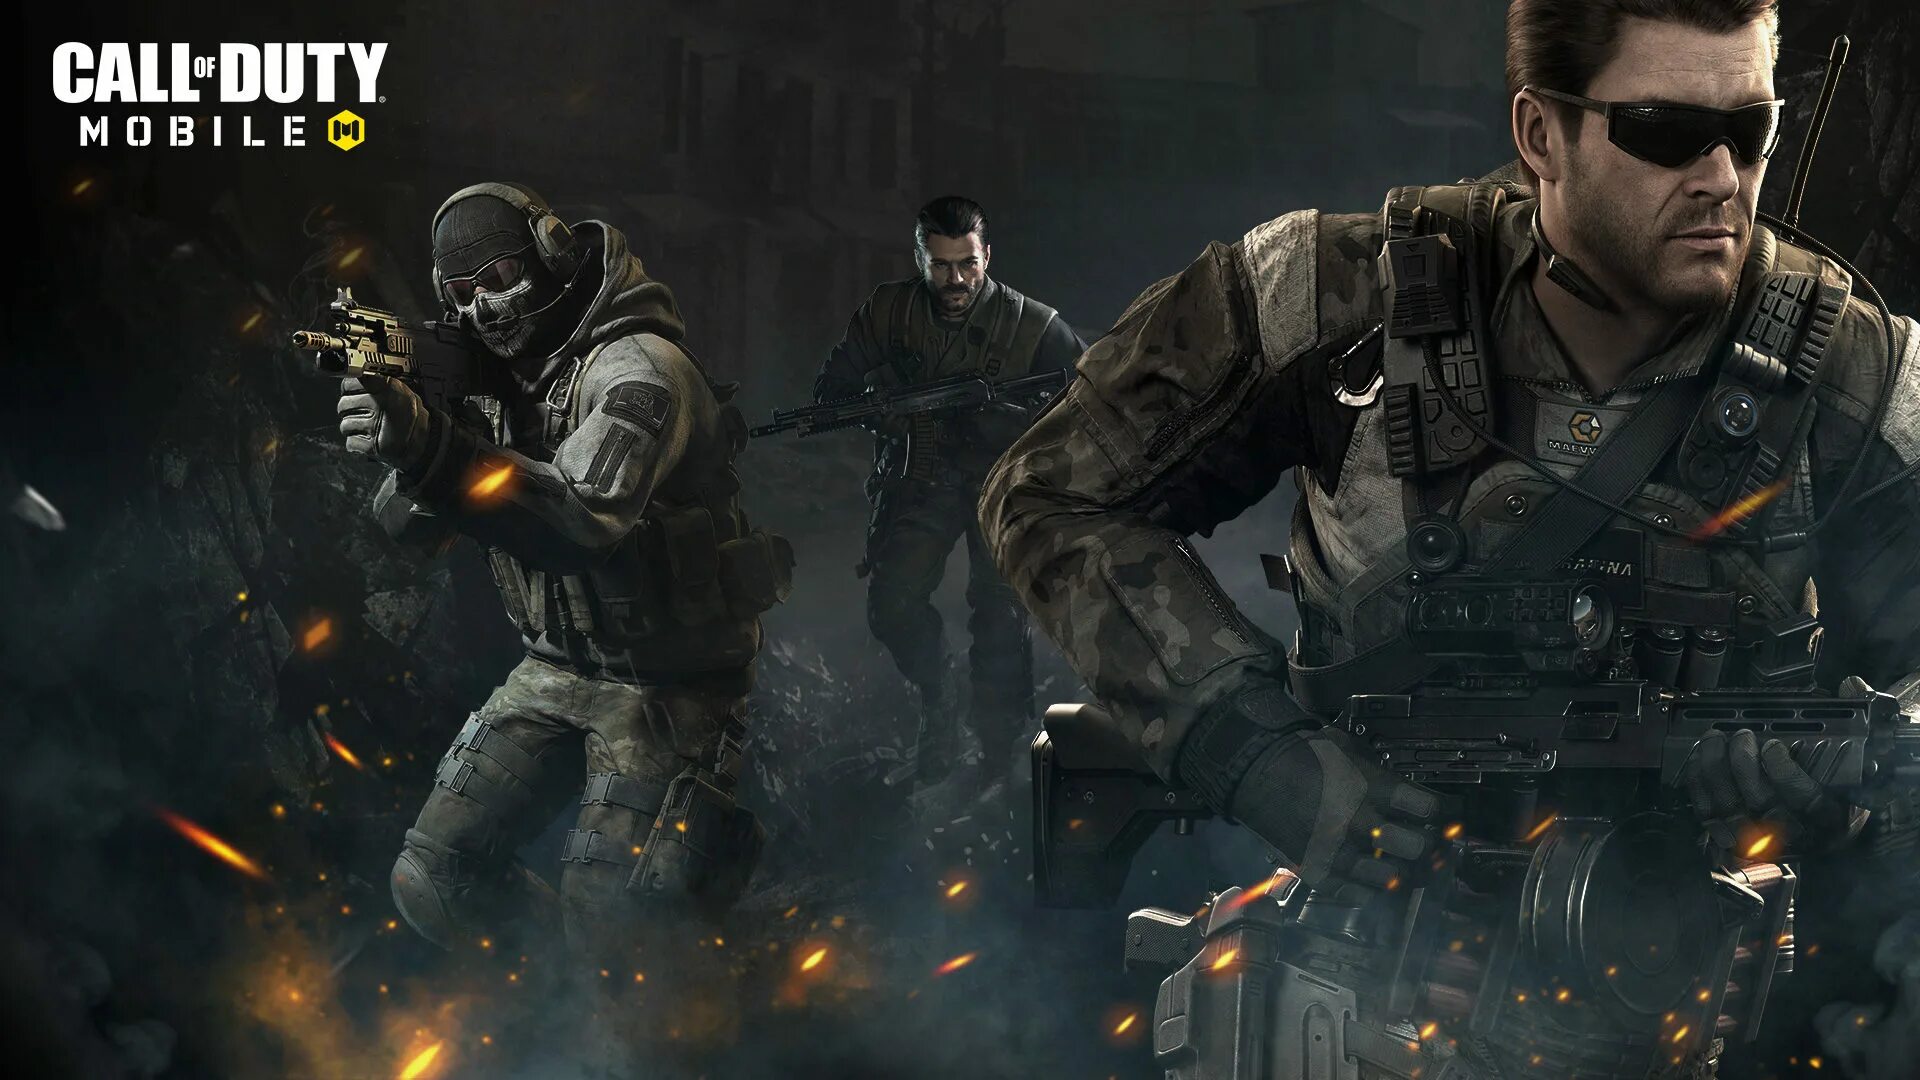 Call of Duty. Cod mobile. Call of Duty mobile фото. Call of Duty mobile Постер.